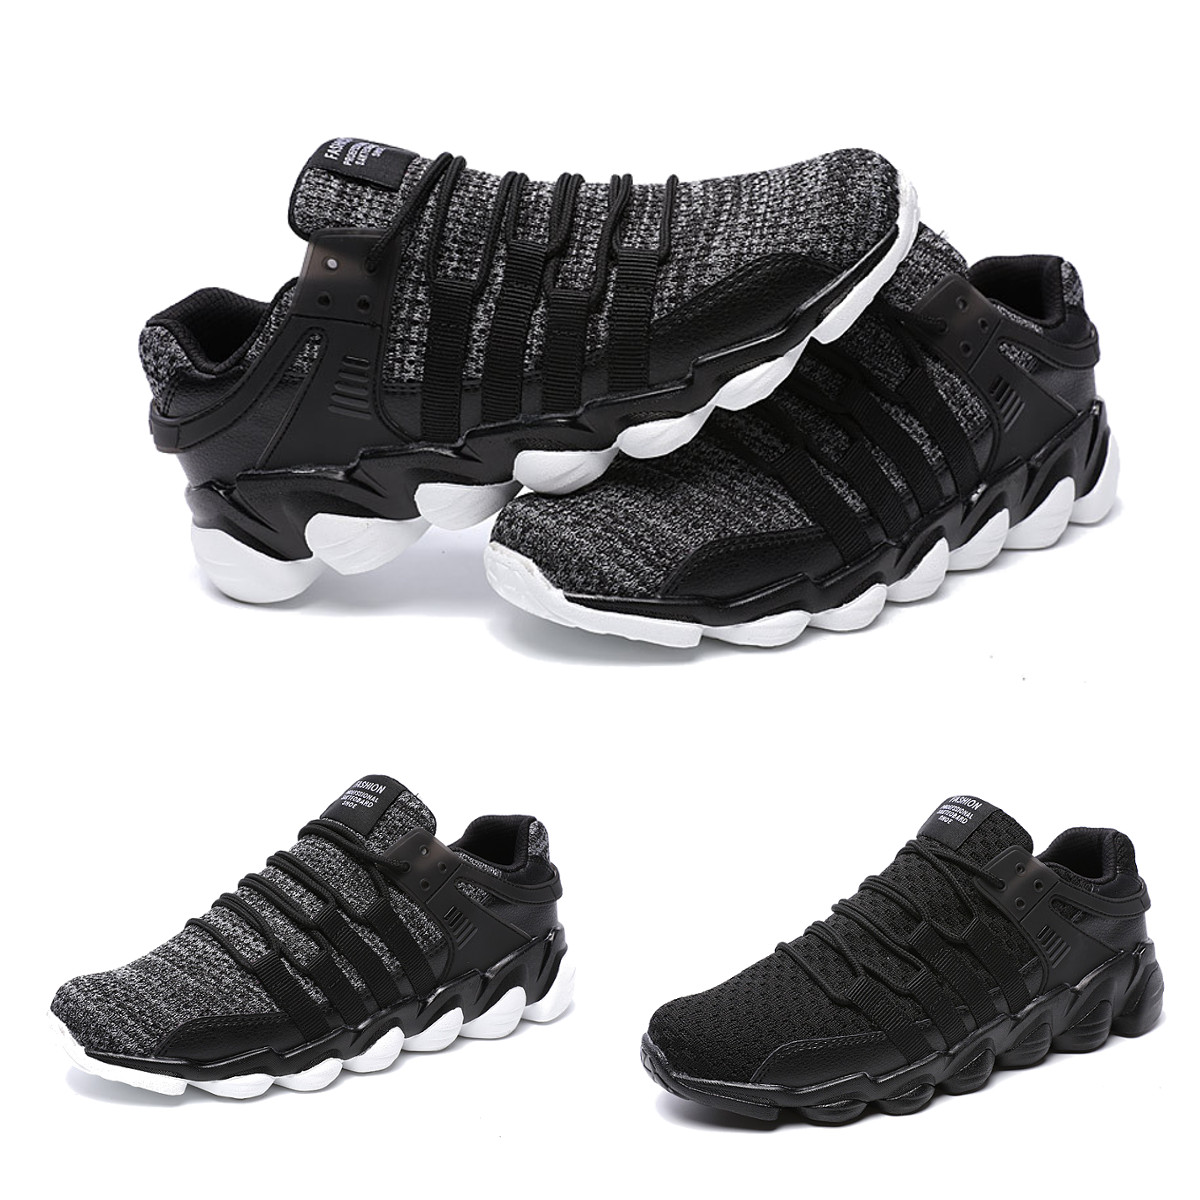 Mens--Breathable-Ankle-Sneakers-Stretchy-Weave-Knit-Non-slip-Comfy-Running-Walking-Shoes-1253828